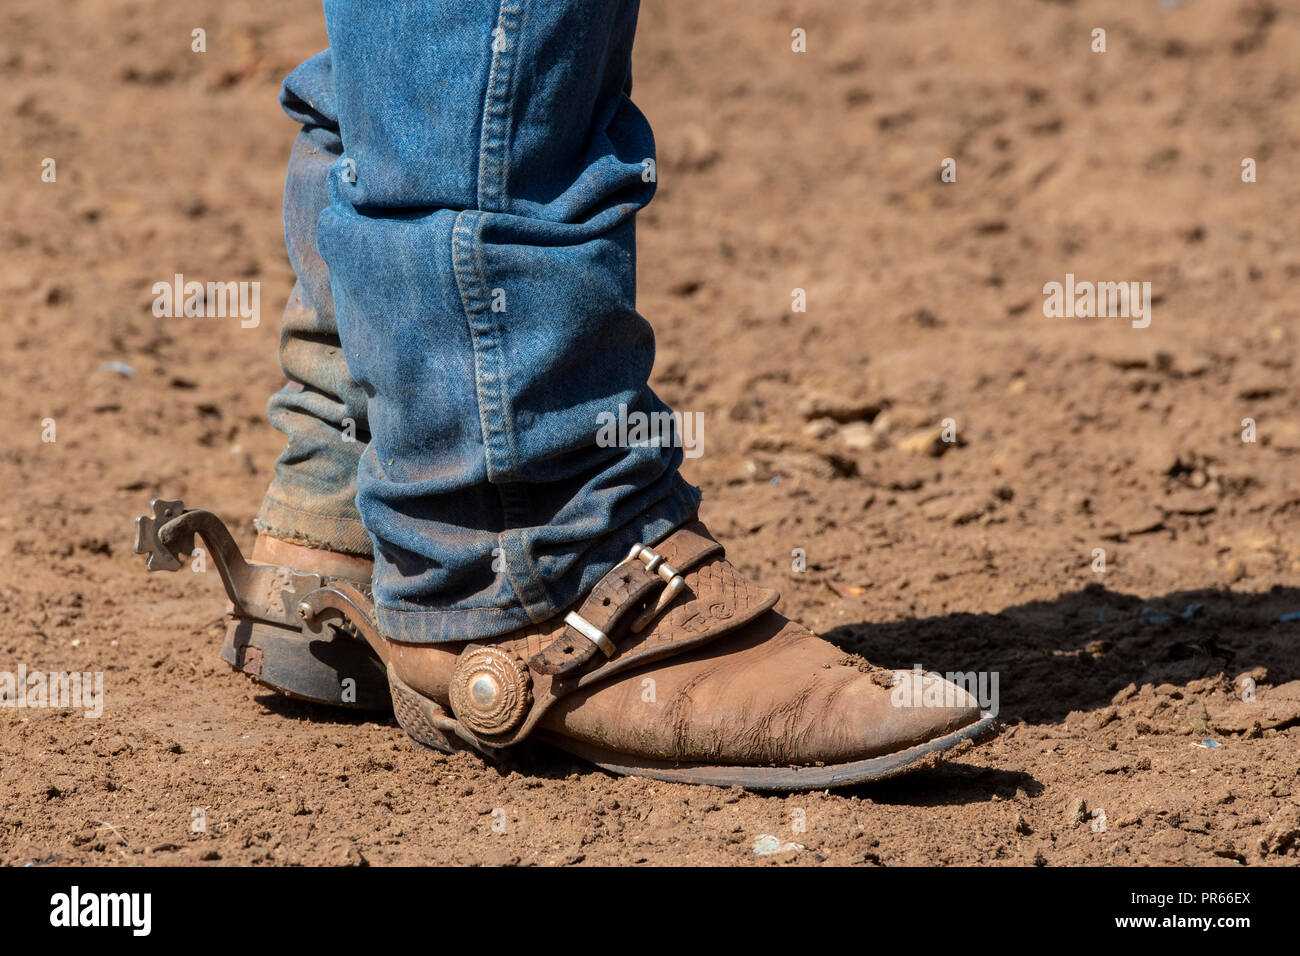 Australia, Northern Territory, Katherine. Detail of typical Outback cowboy  boots, jeans and spurs Stock Photo - Alamy